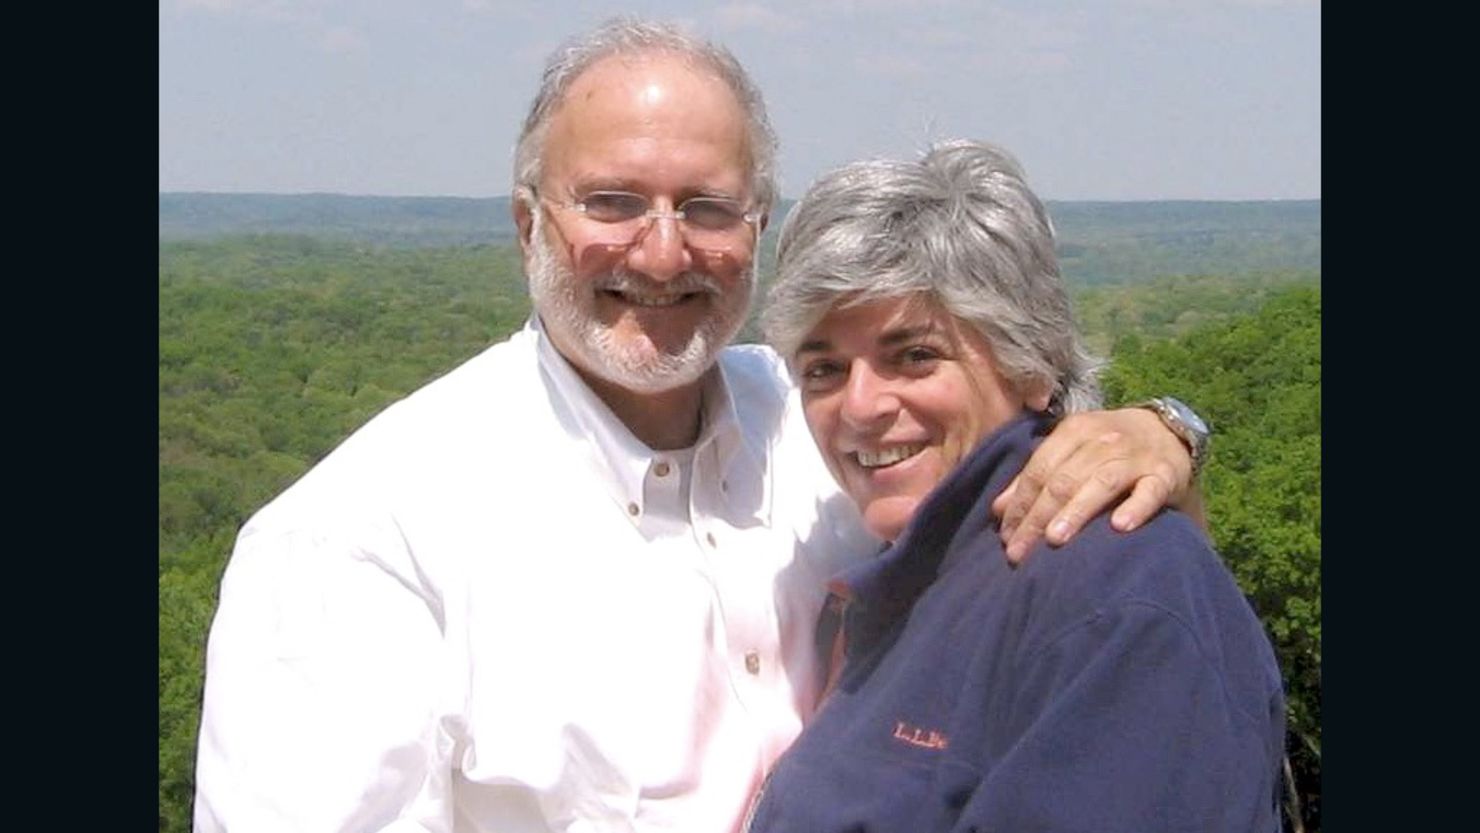 Alan Gross is pictured with his wife, Judy.